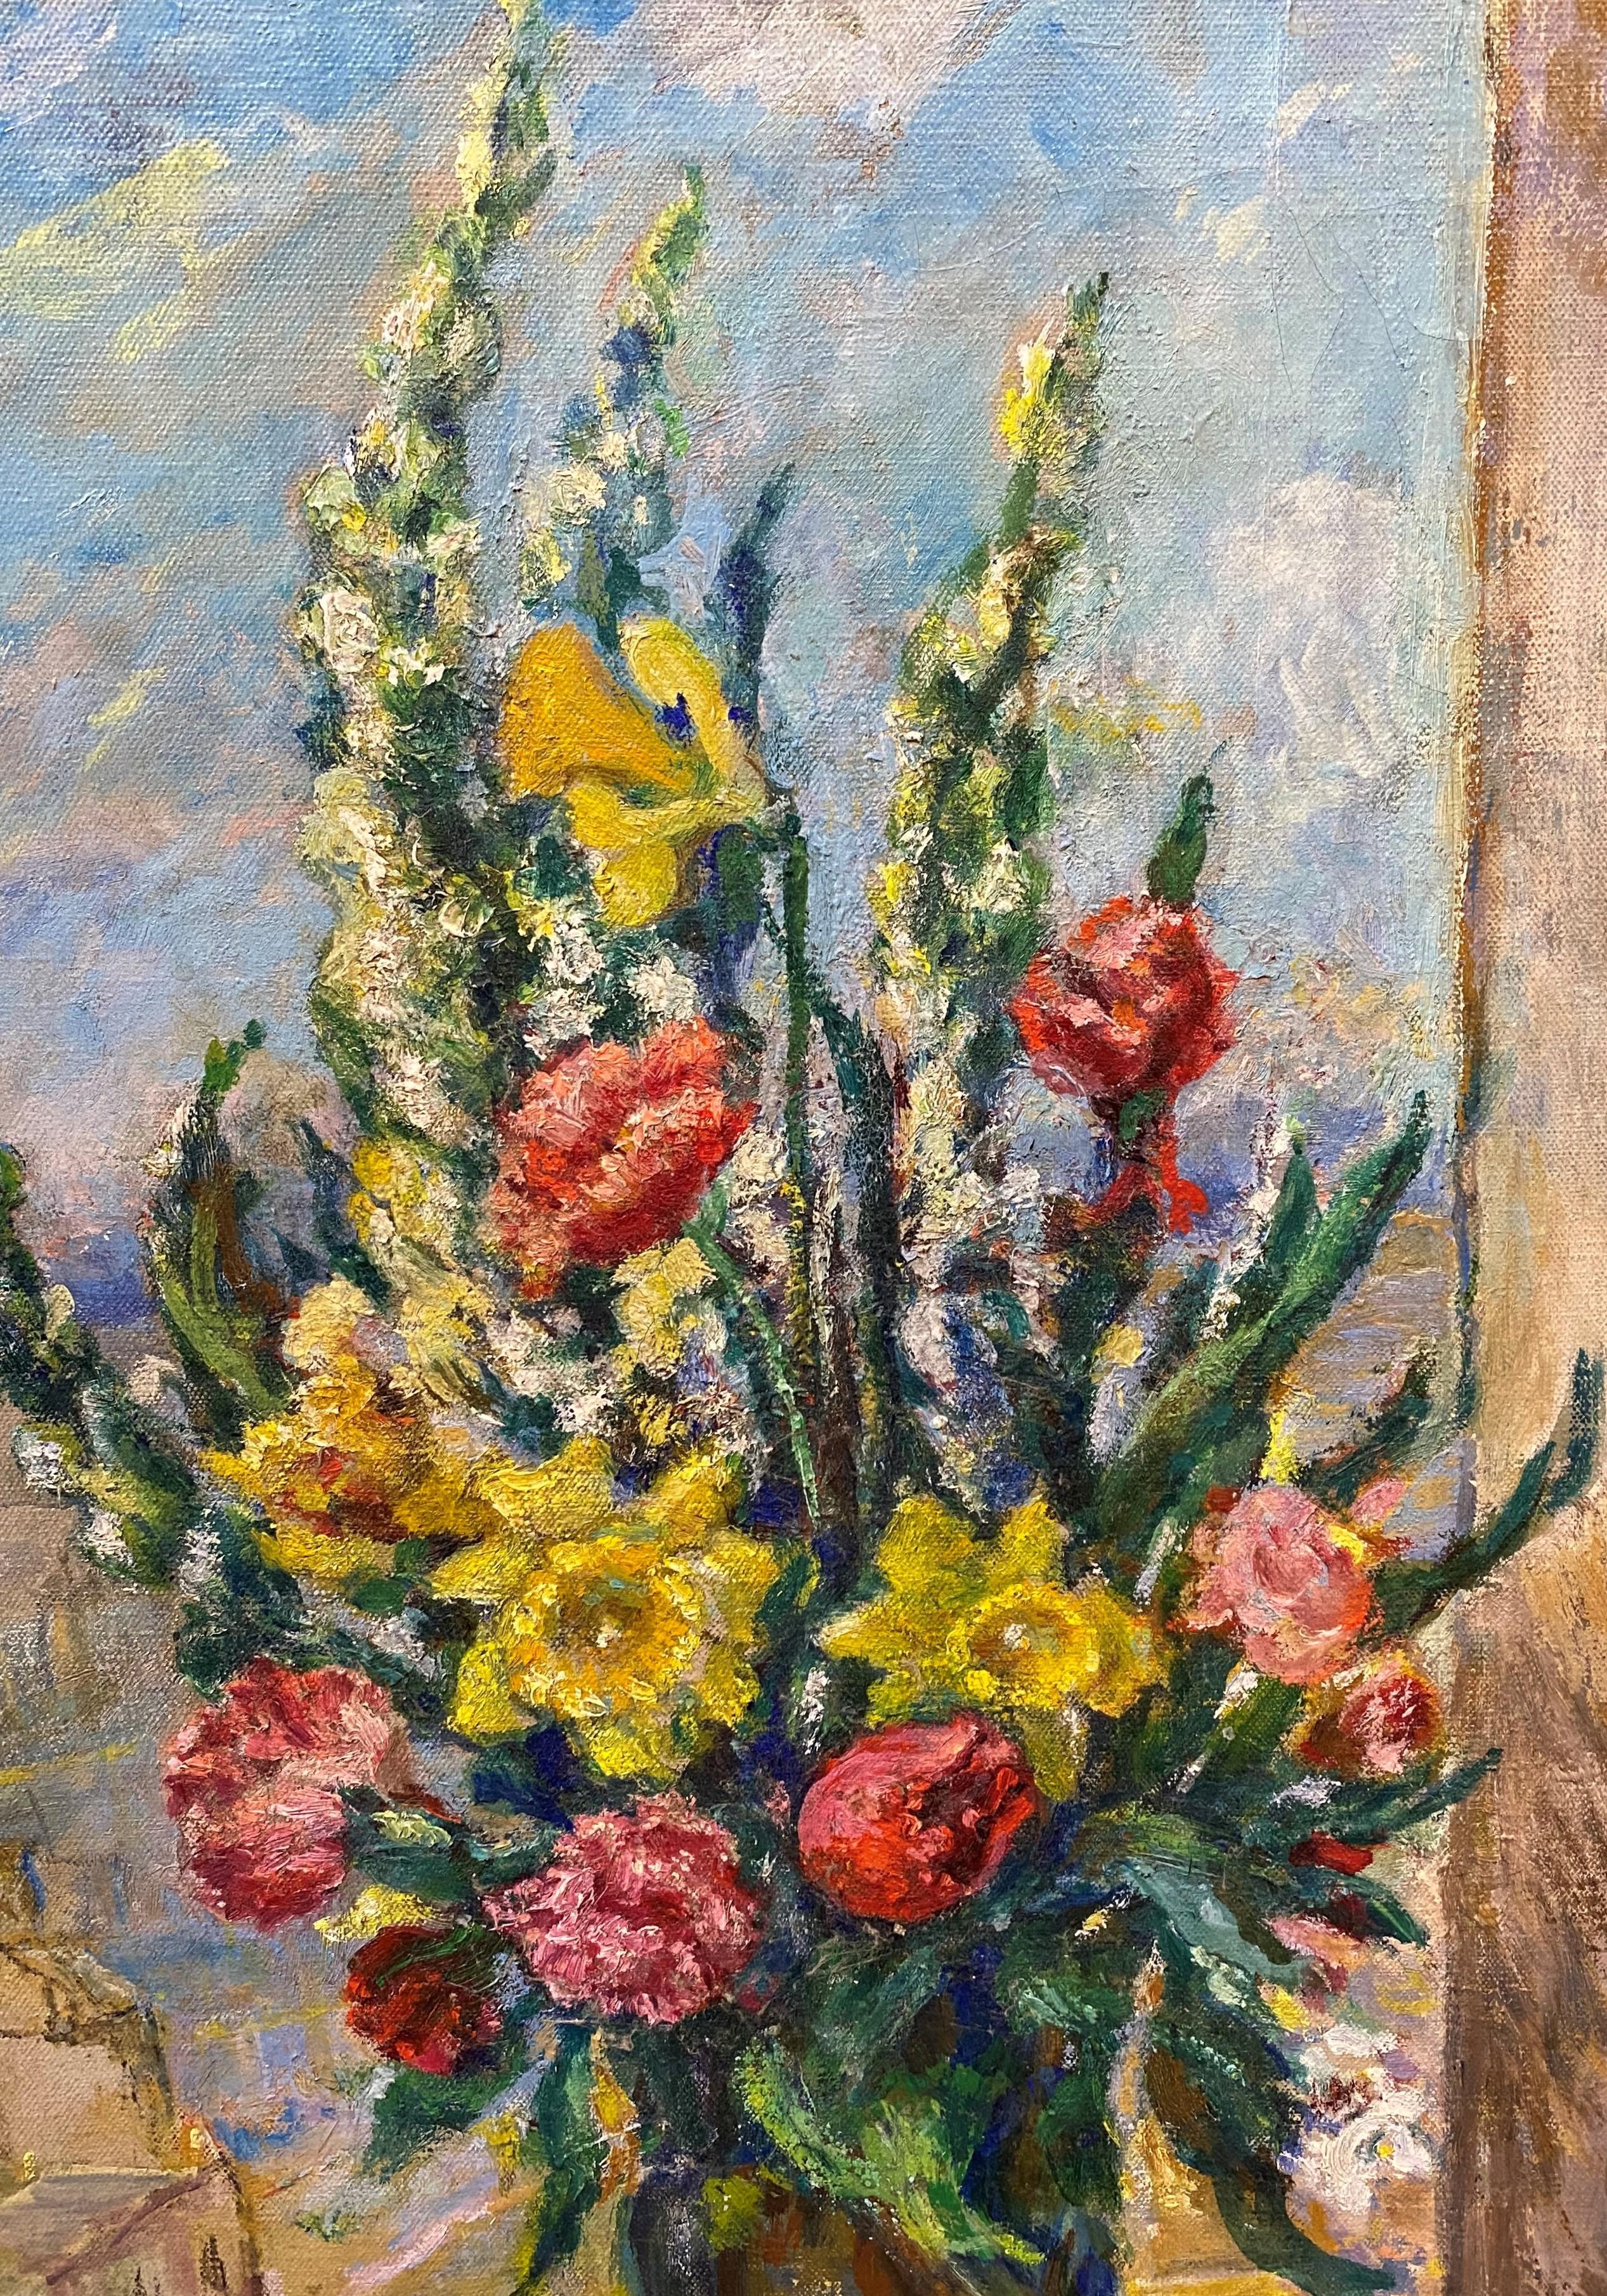 Flowers in a Vase with the Eiffel Tower - American Impressionist Art by Mary Hutchinson Peixotto